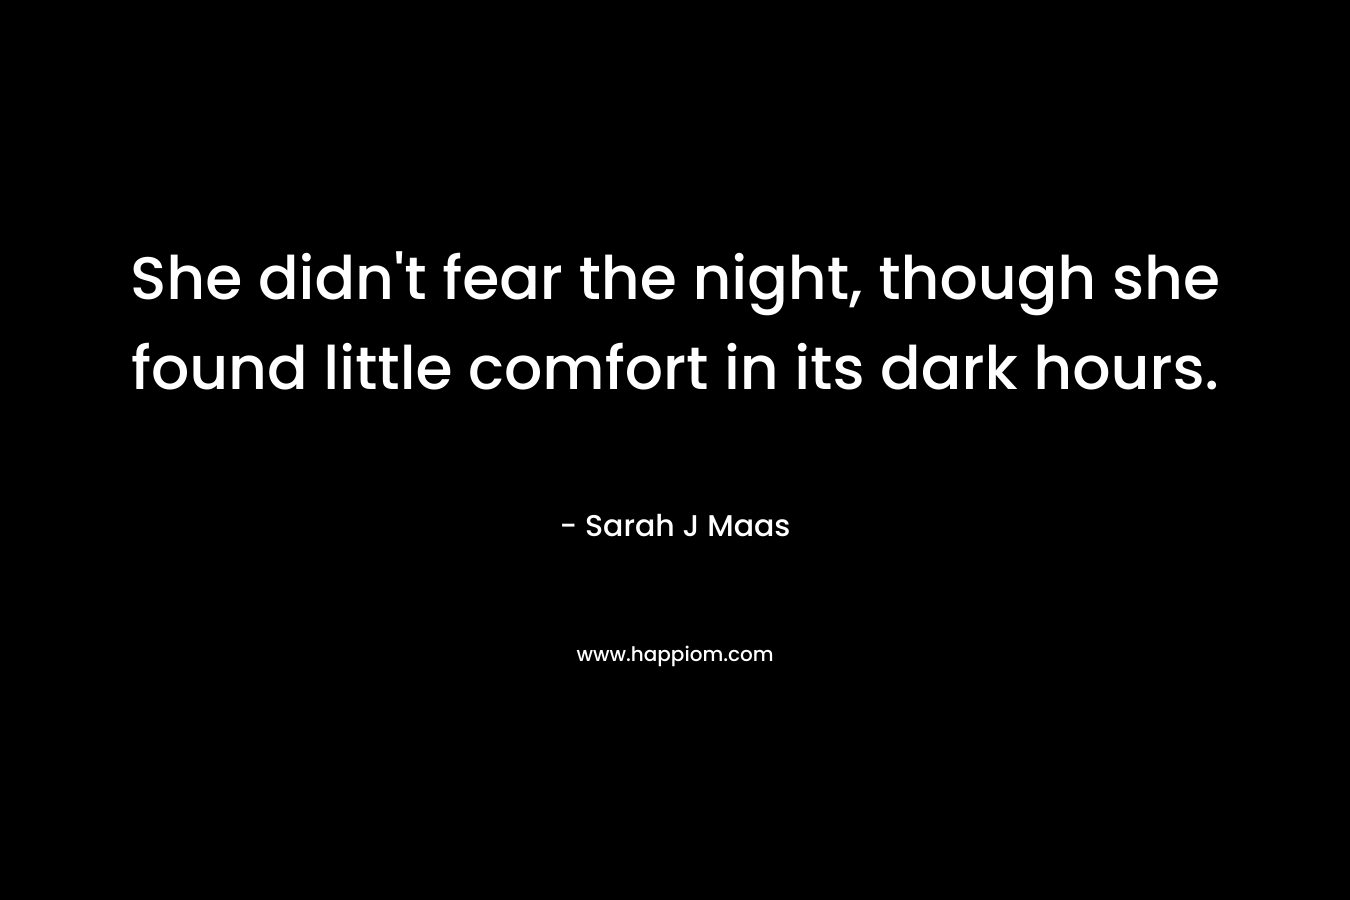 She didn't fear the night, though she found little comfort in its dark hours.